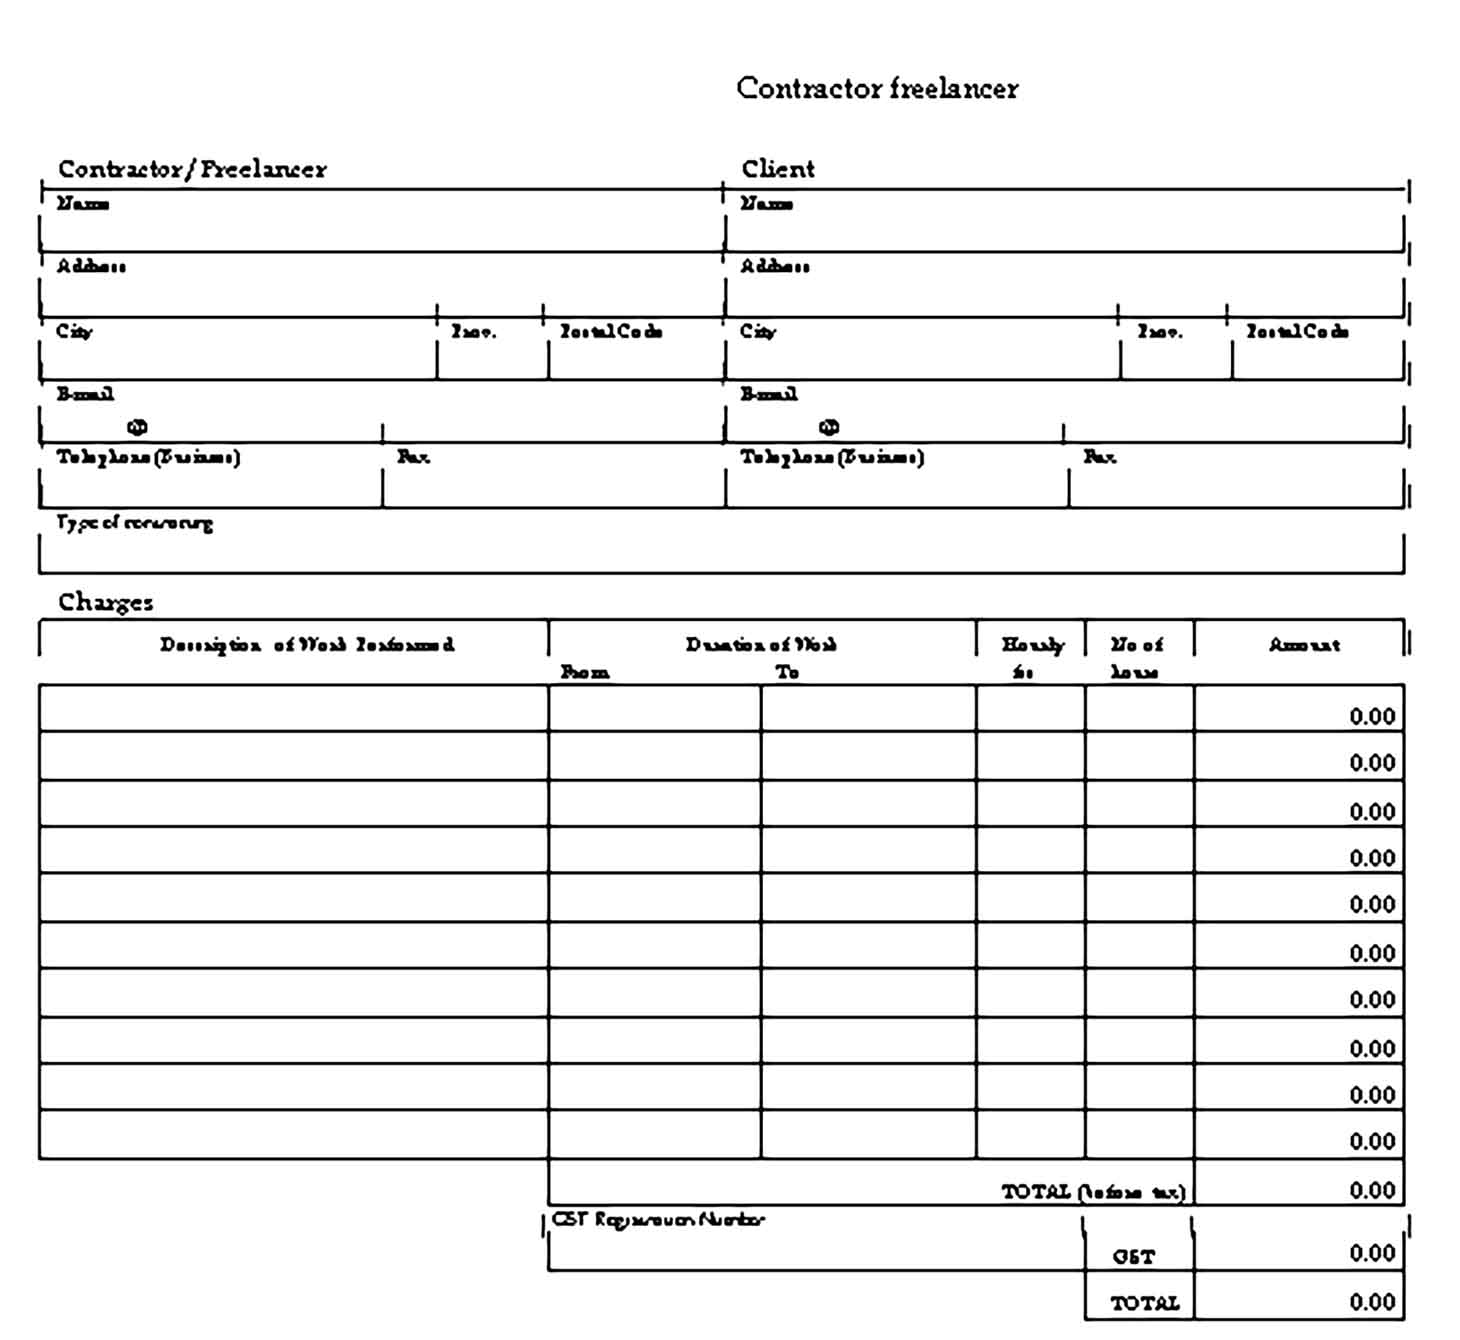 Sample Templates contractor freelancer invoice